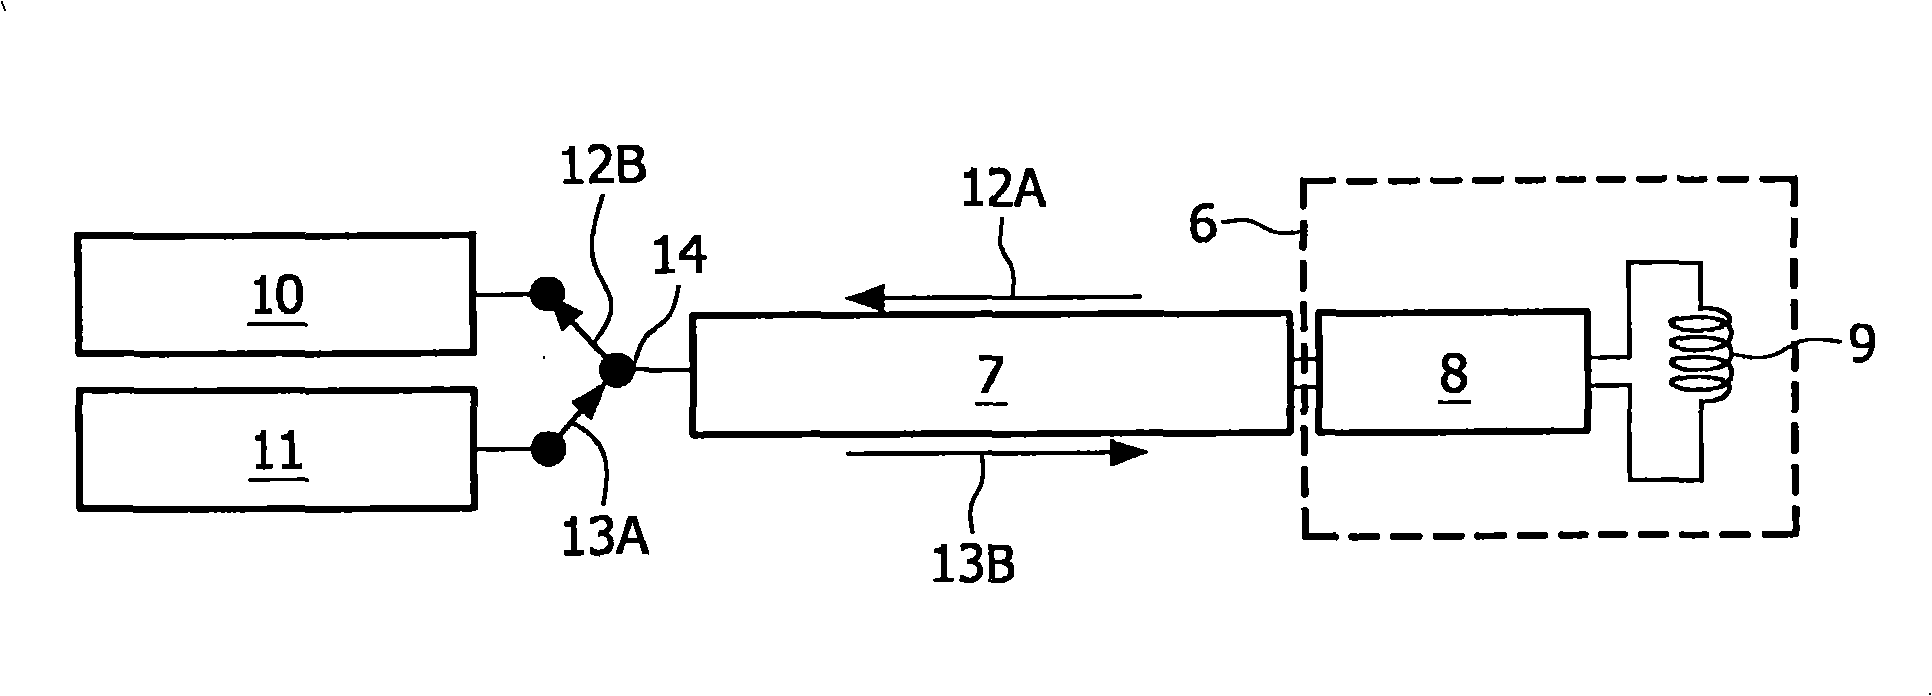 Tunable and/or detunable mr receive coil arrangements